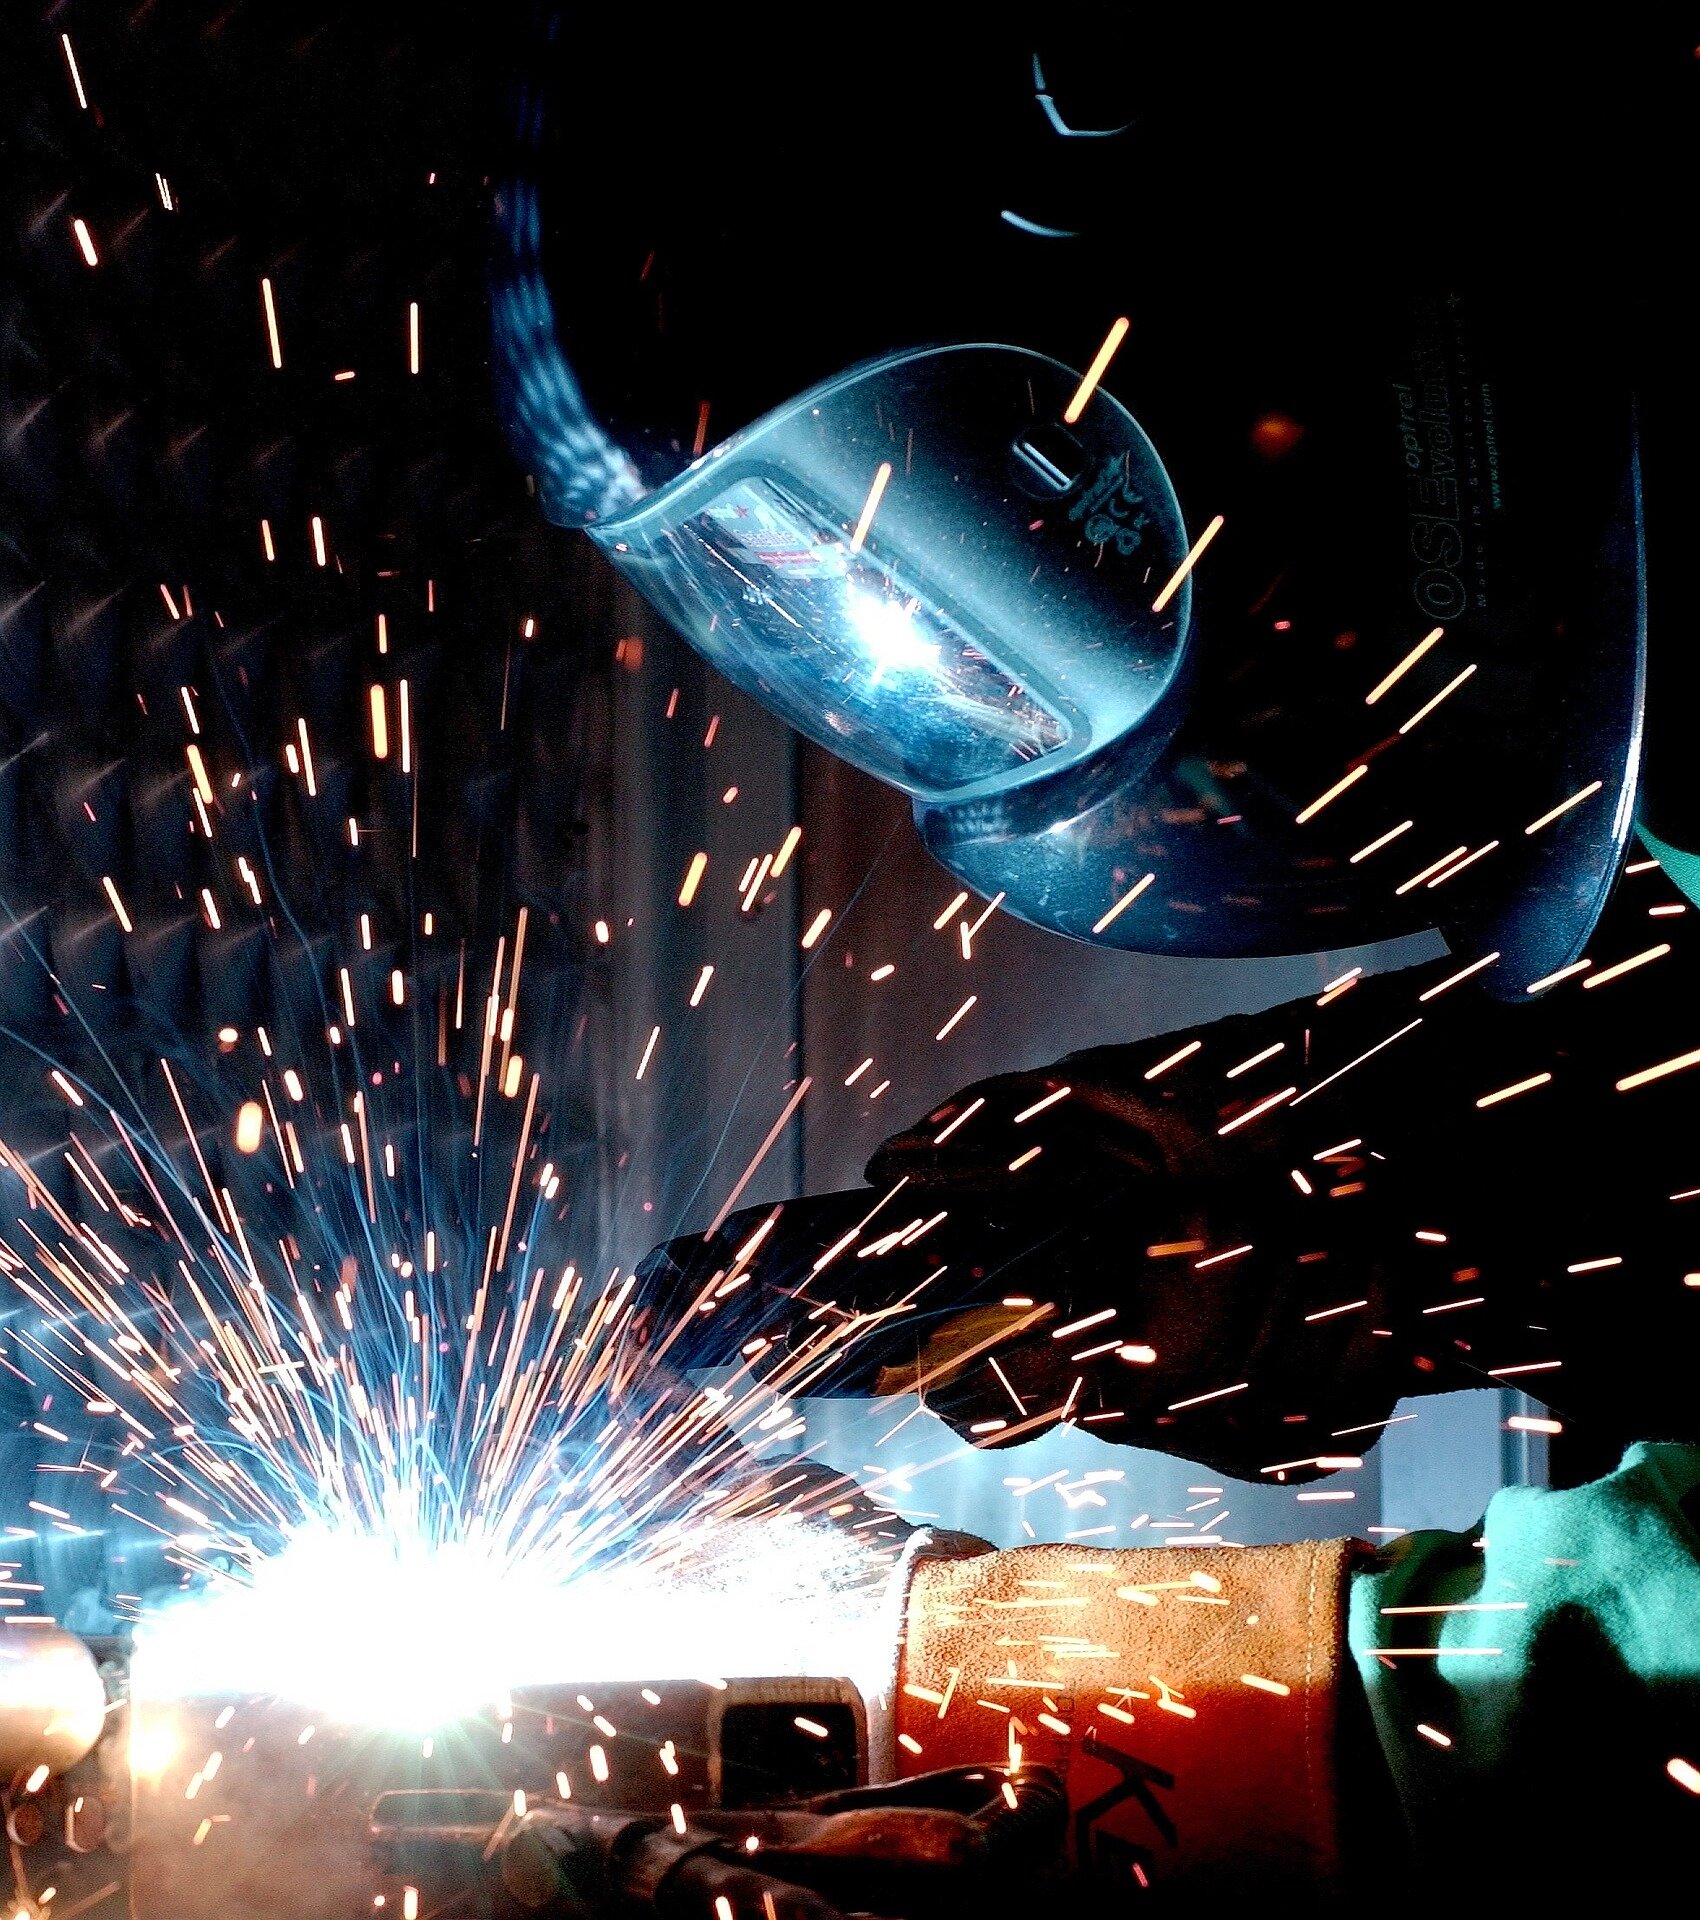 Survey finds most Australian welders exposed to high levels of dangerous fumes